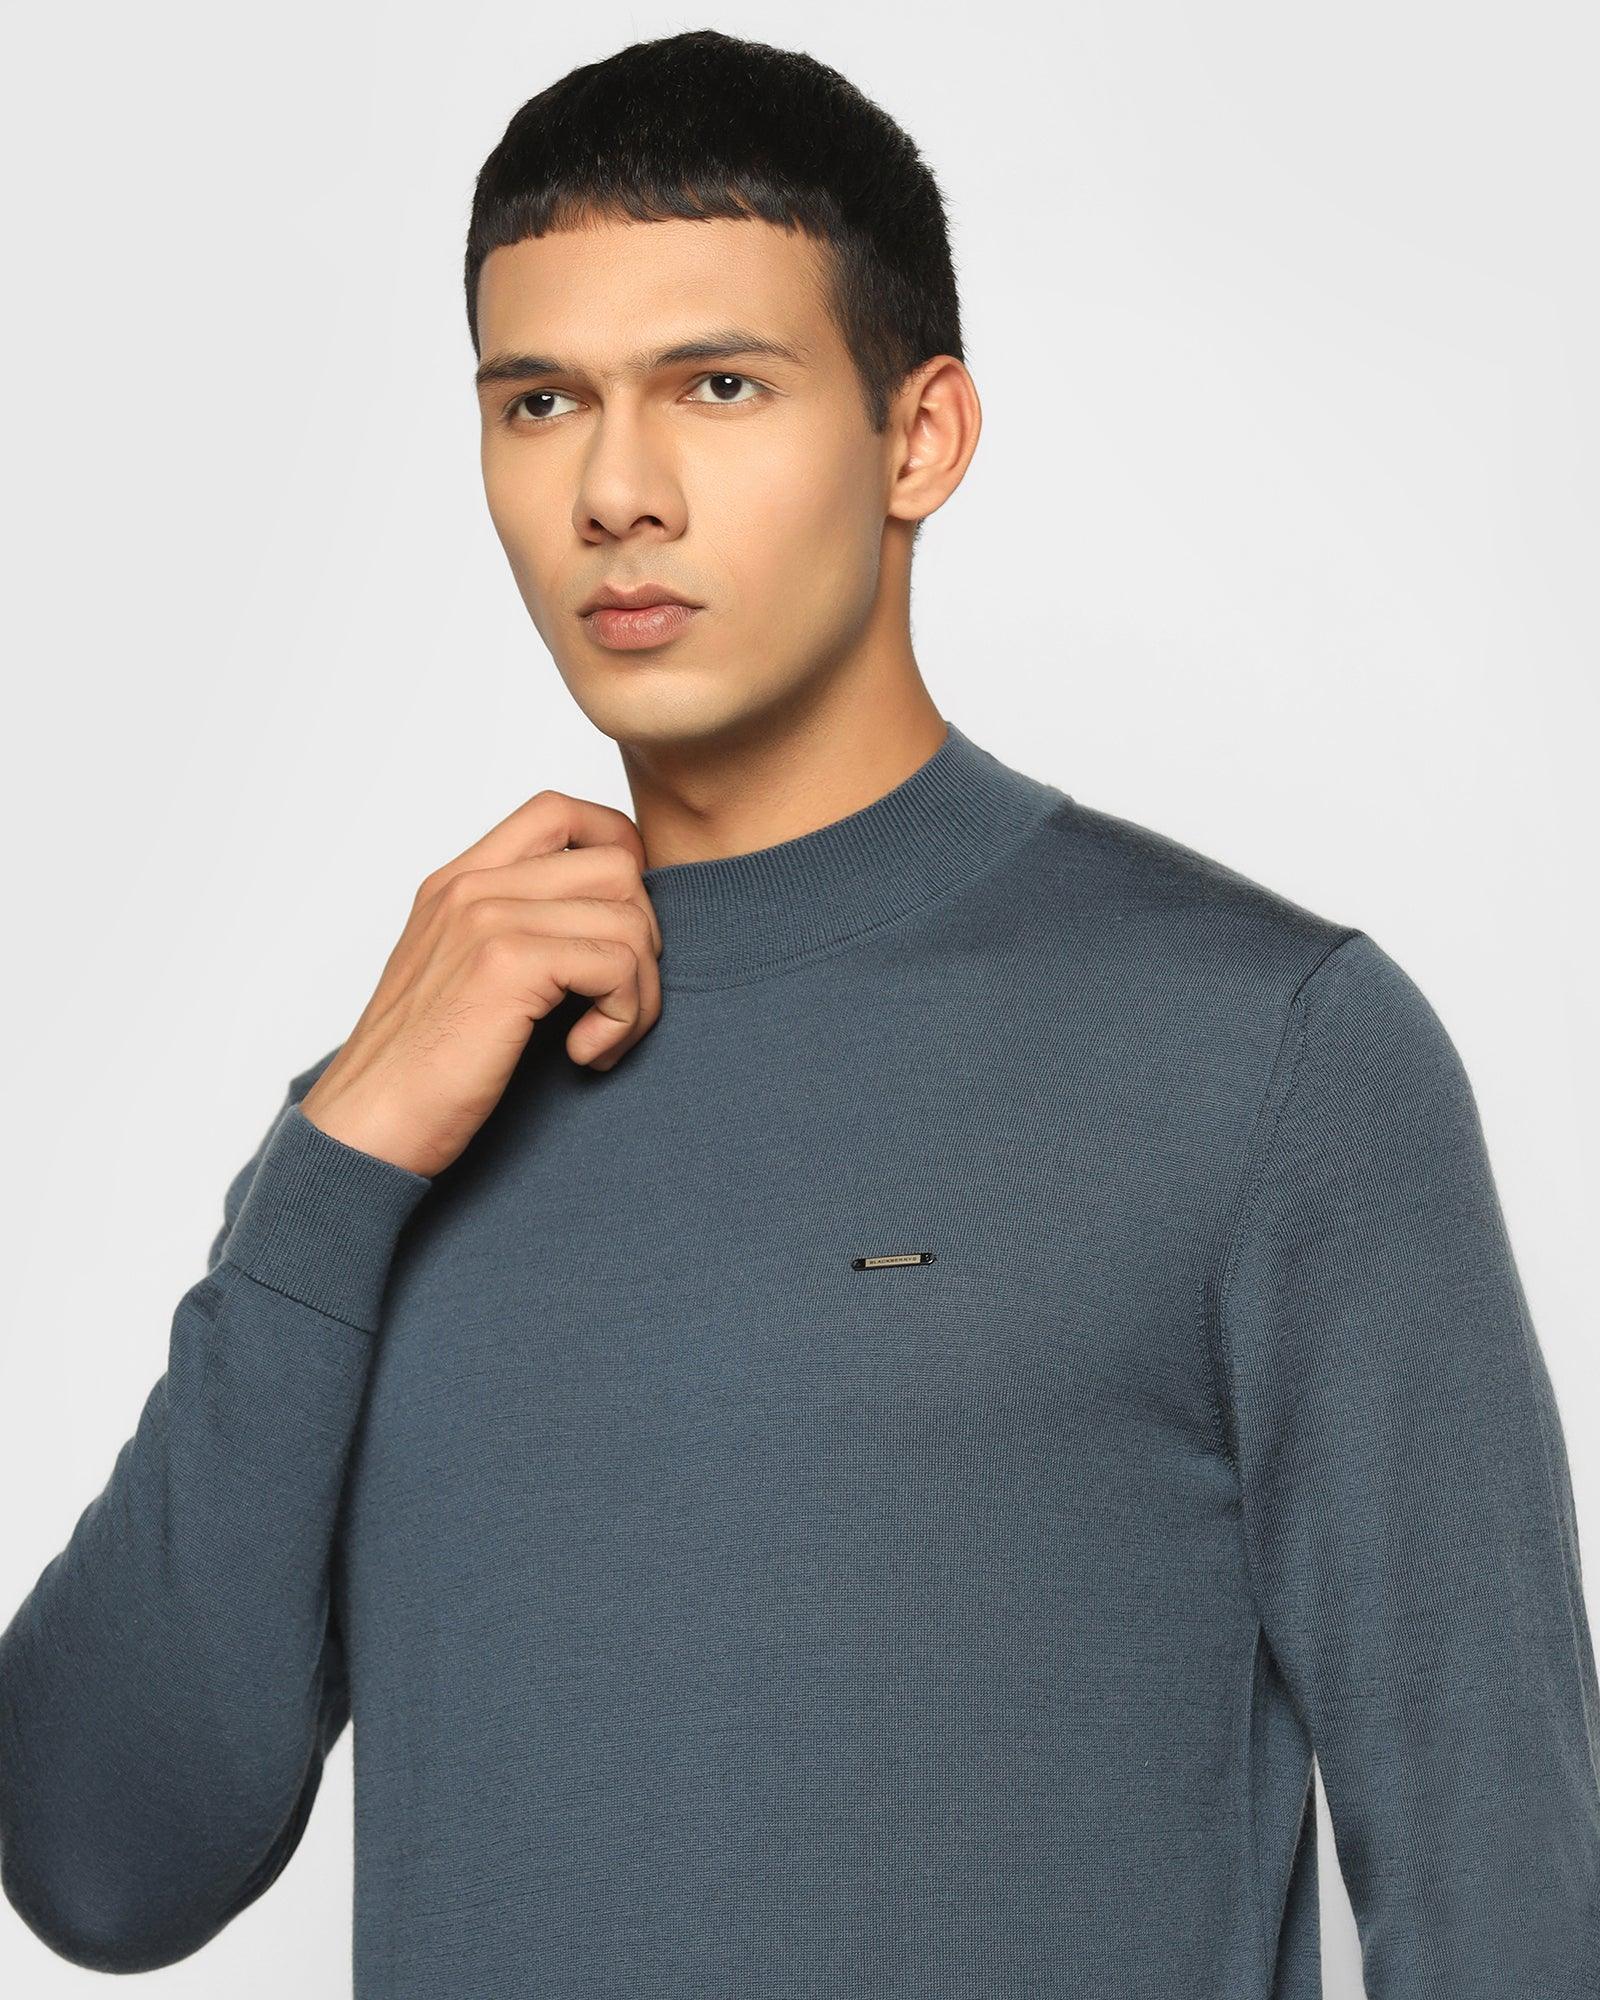 Stylized Collar Placid Blue Solid Sweater - Domin